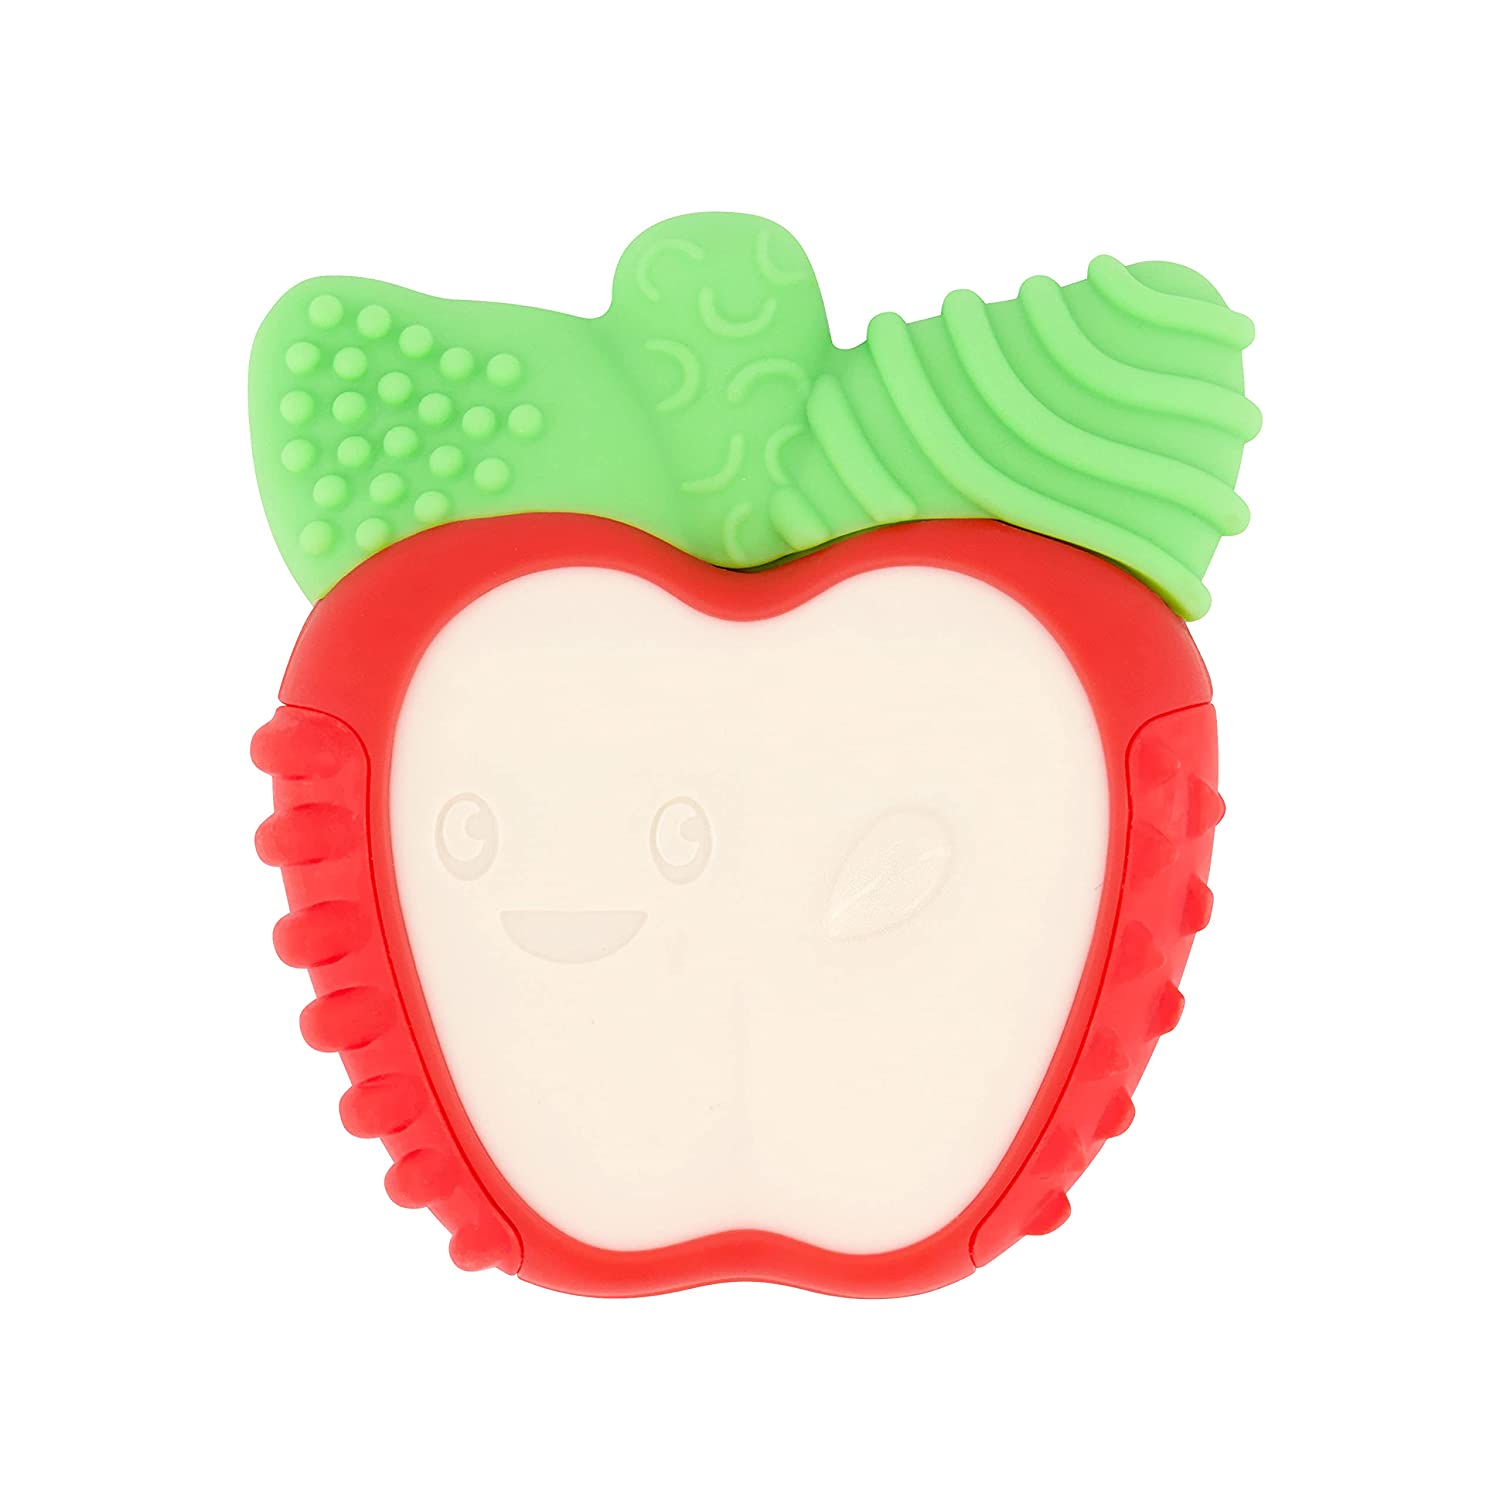 Infantino Lil' Nibblers Vibrating Apple Teether -Sensory Exploration and Teething Relief with Soothing Vibrations and Textures, Red Apple.